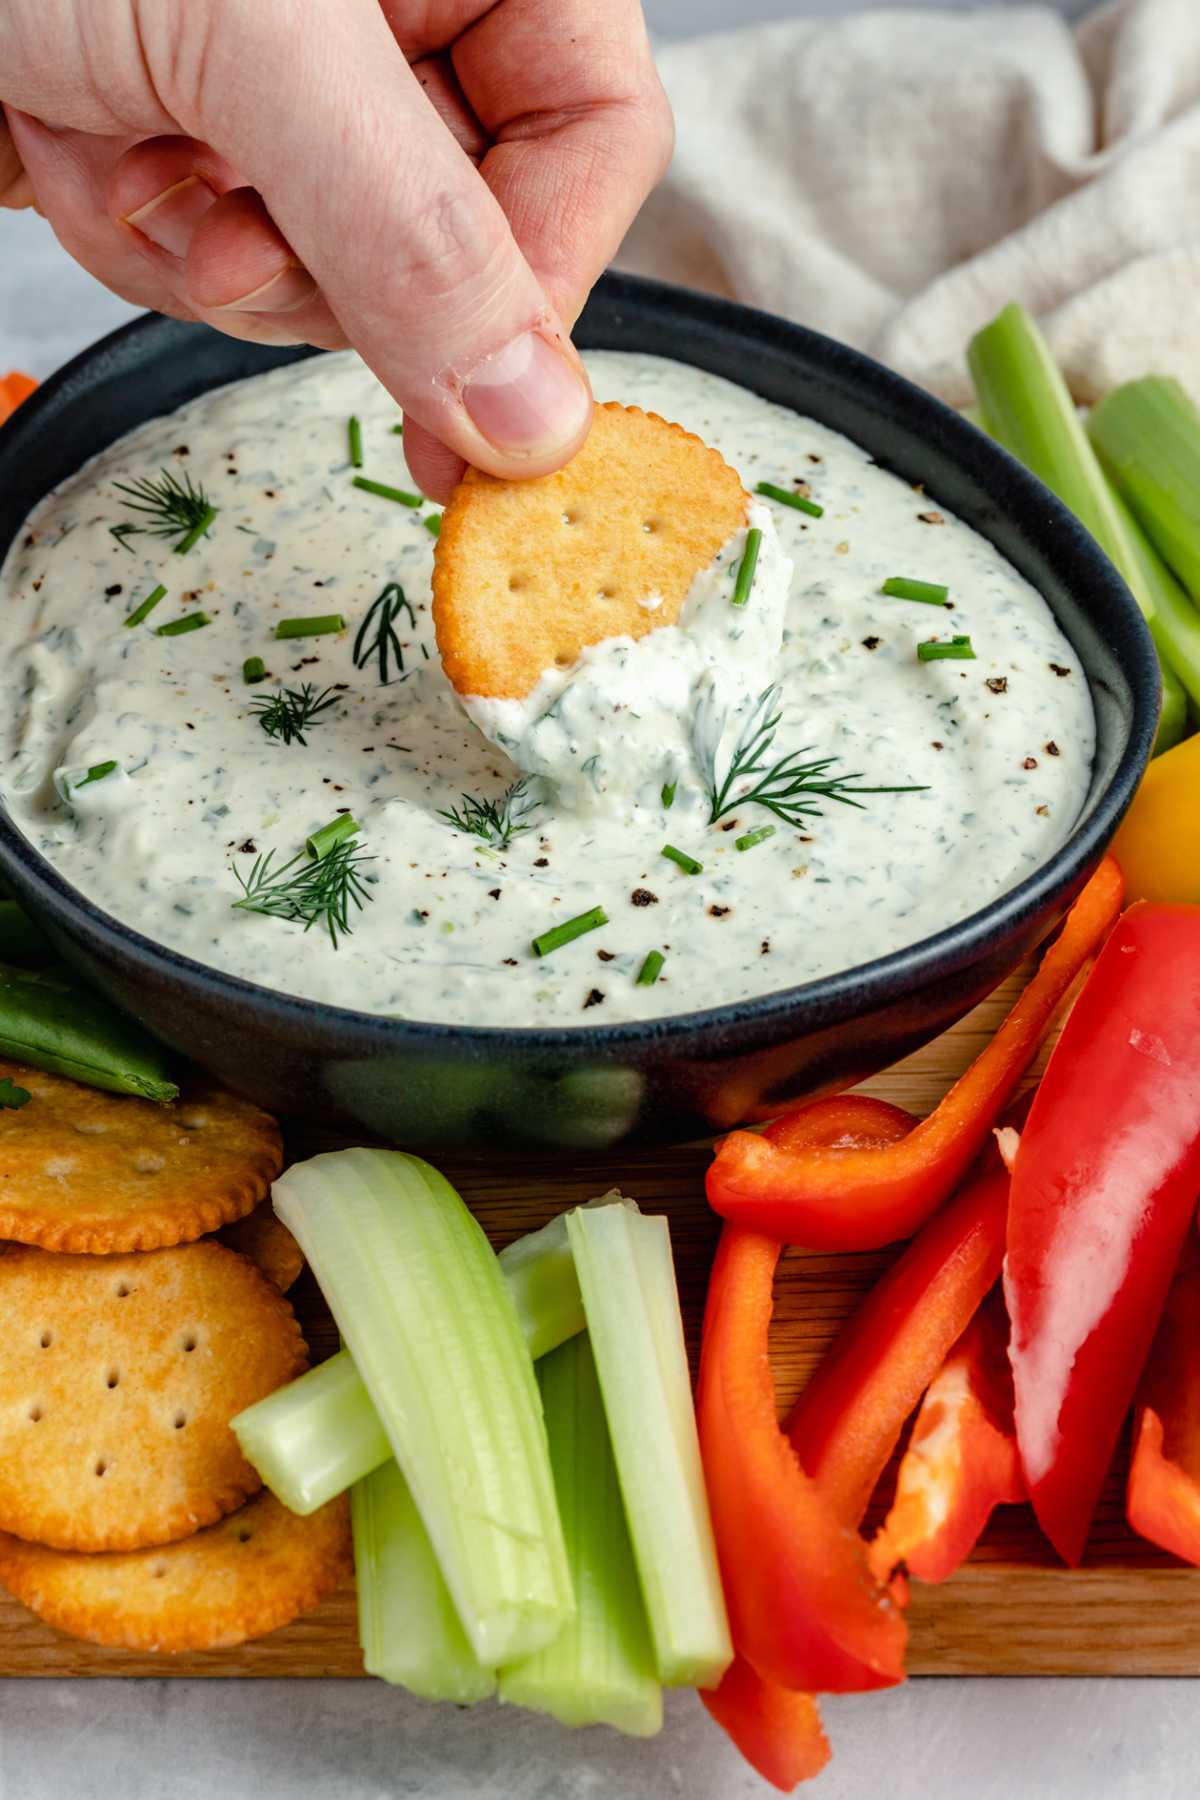 Hand dipping a cracker into a creamy dip with fresh herbs.